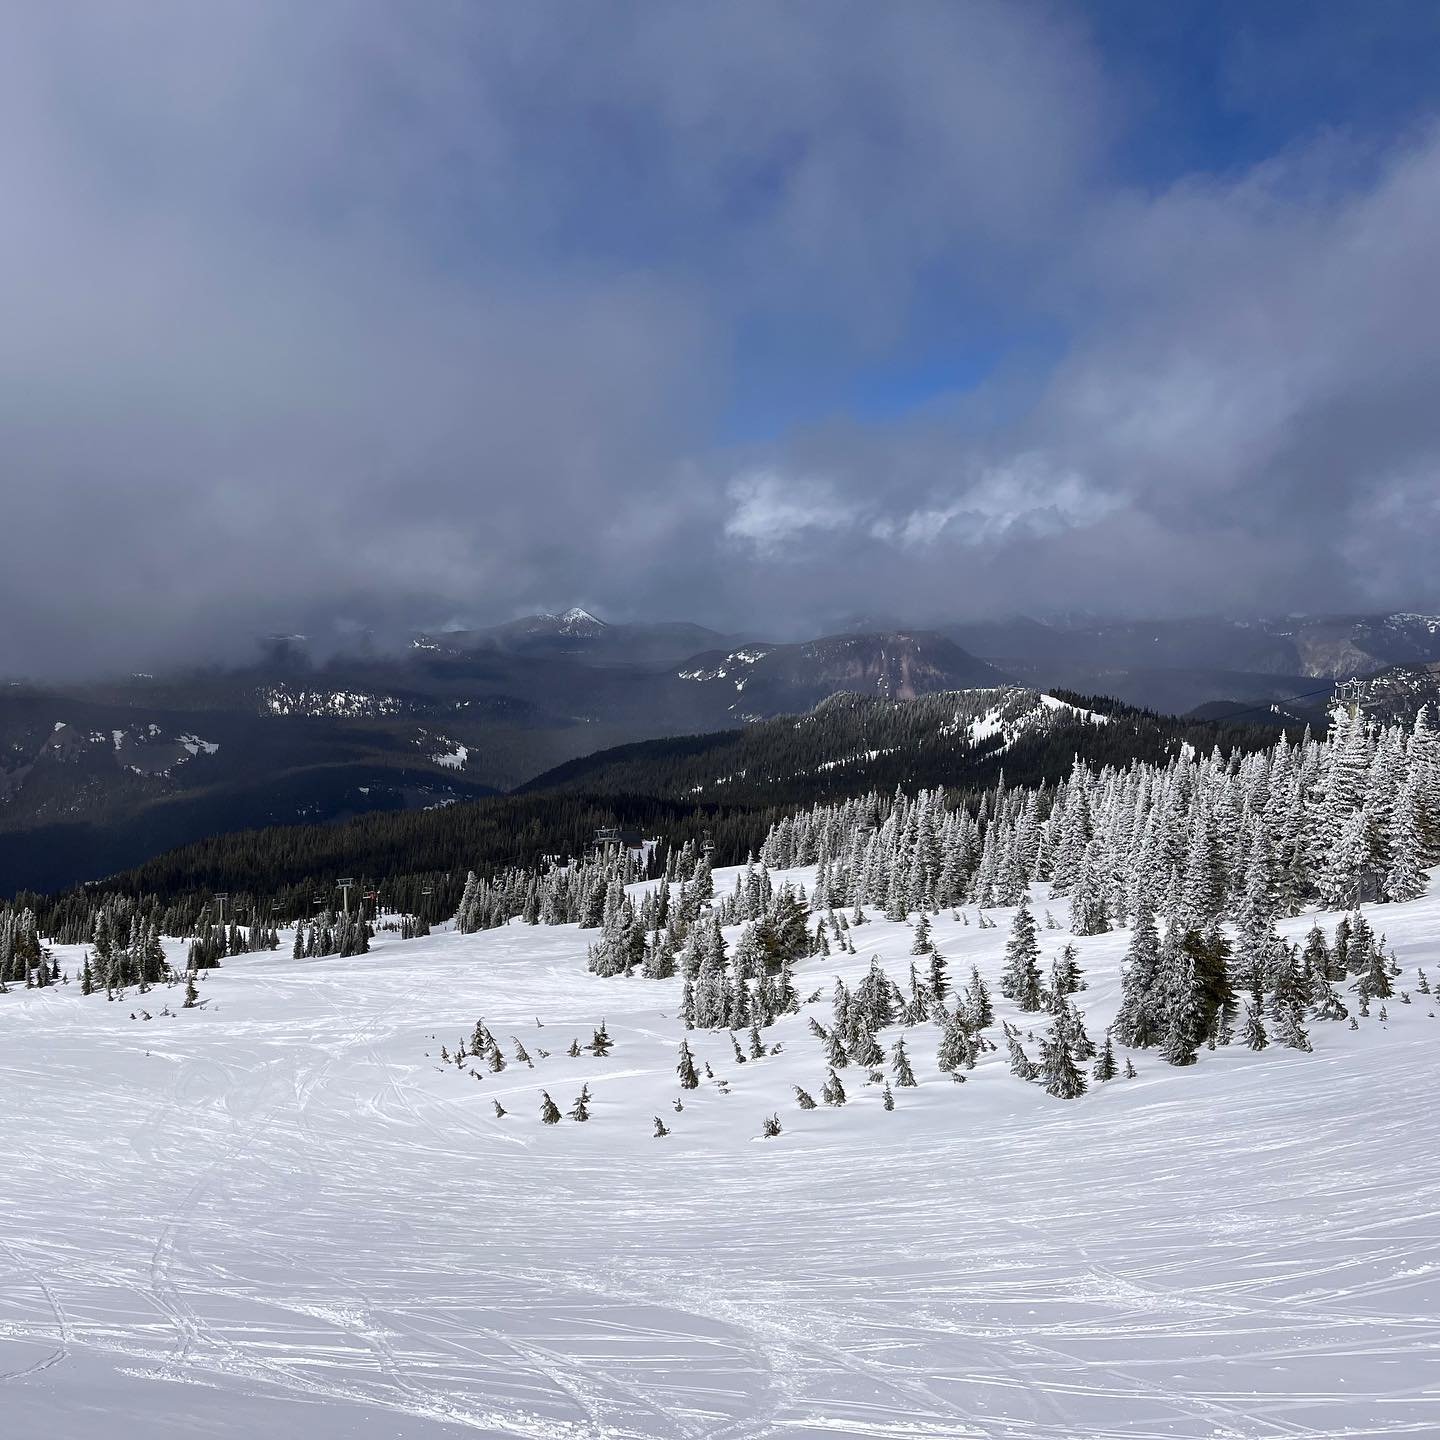 INITIAL IMPRESSIONS @whitepass, WA:
- Beautiful setting, with fantastic views of Rainier on clear days, though sadly the mountain hid behind clouds all day for our visit.
- Great near-treeline intermediate terrain, with rolling groomers and islands o